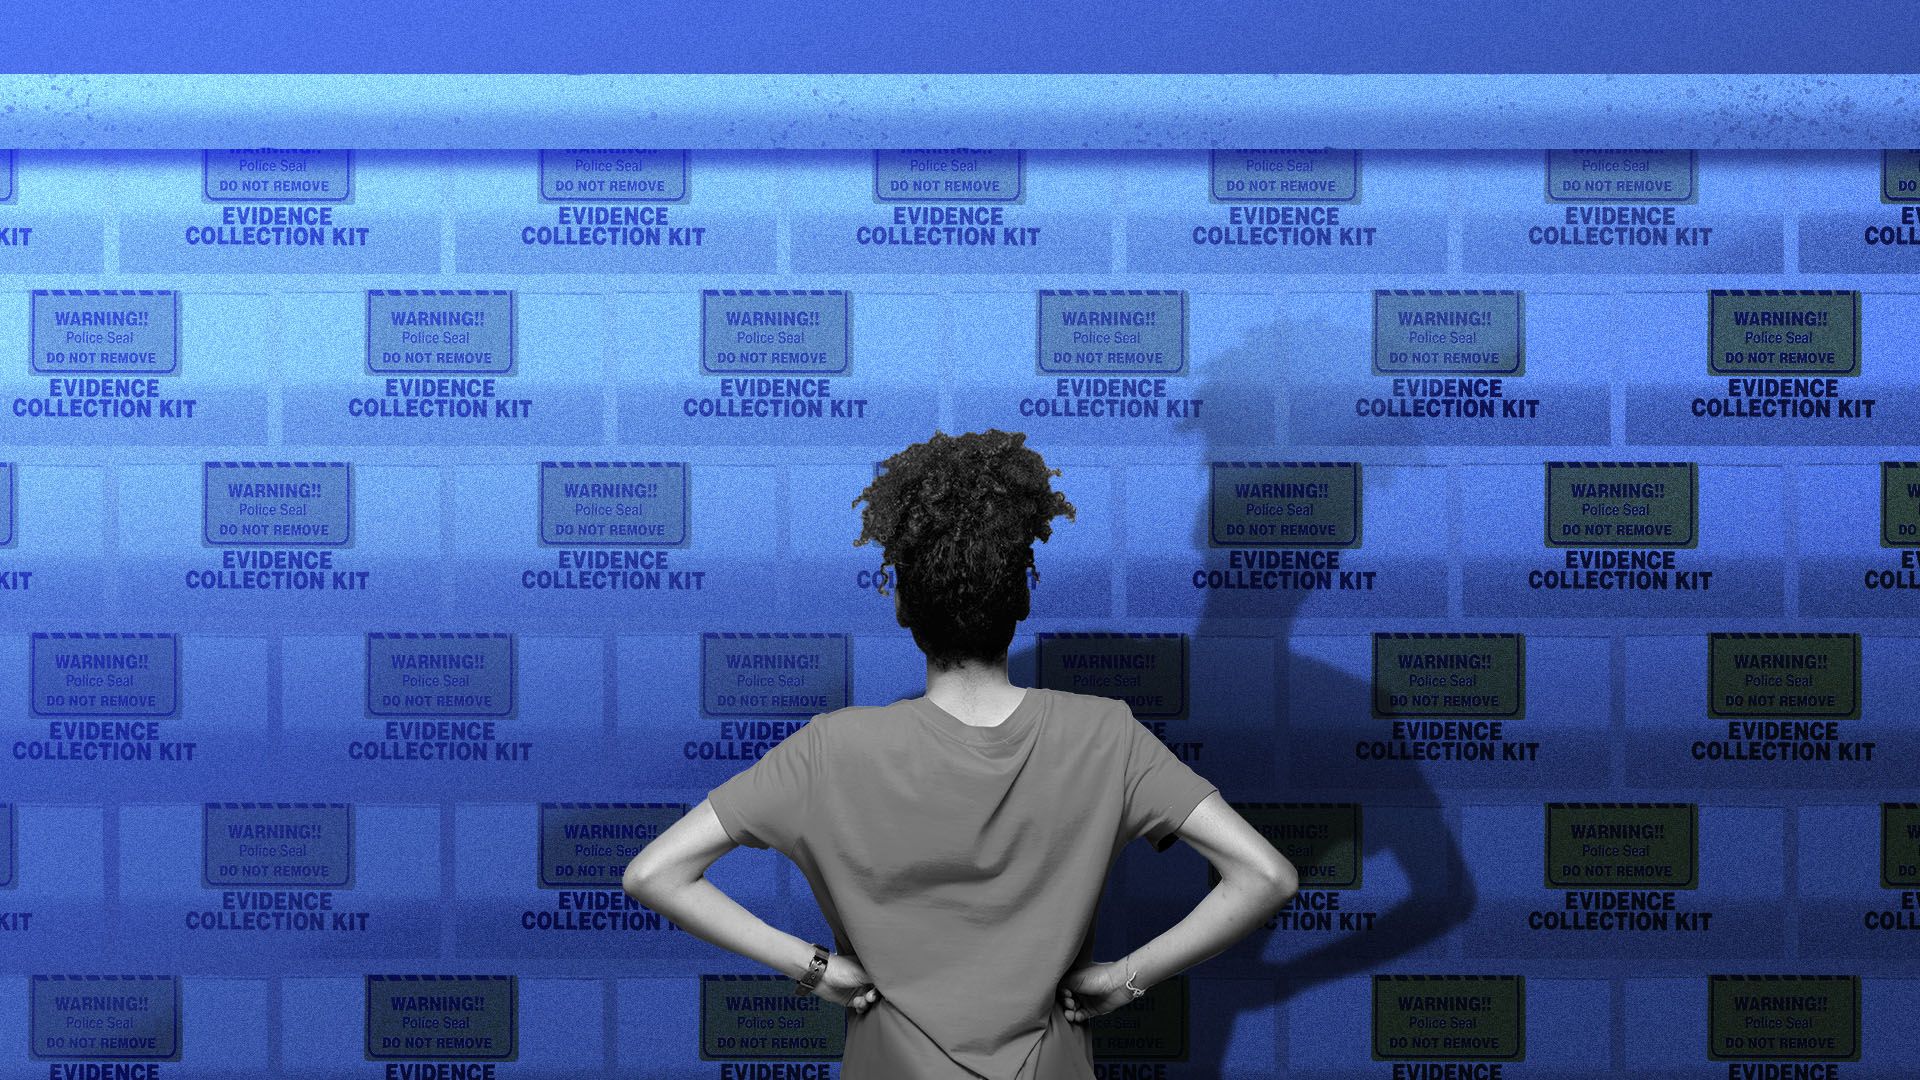 Illustration of a woman with her hands on her hips facing a wall made out of police evidence collection kit boxes